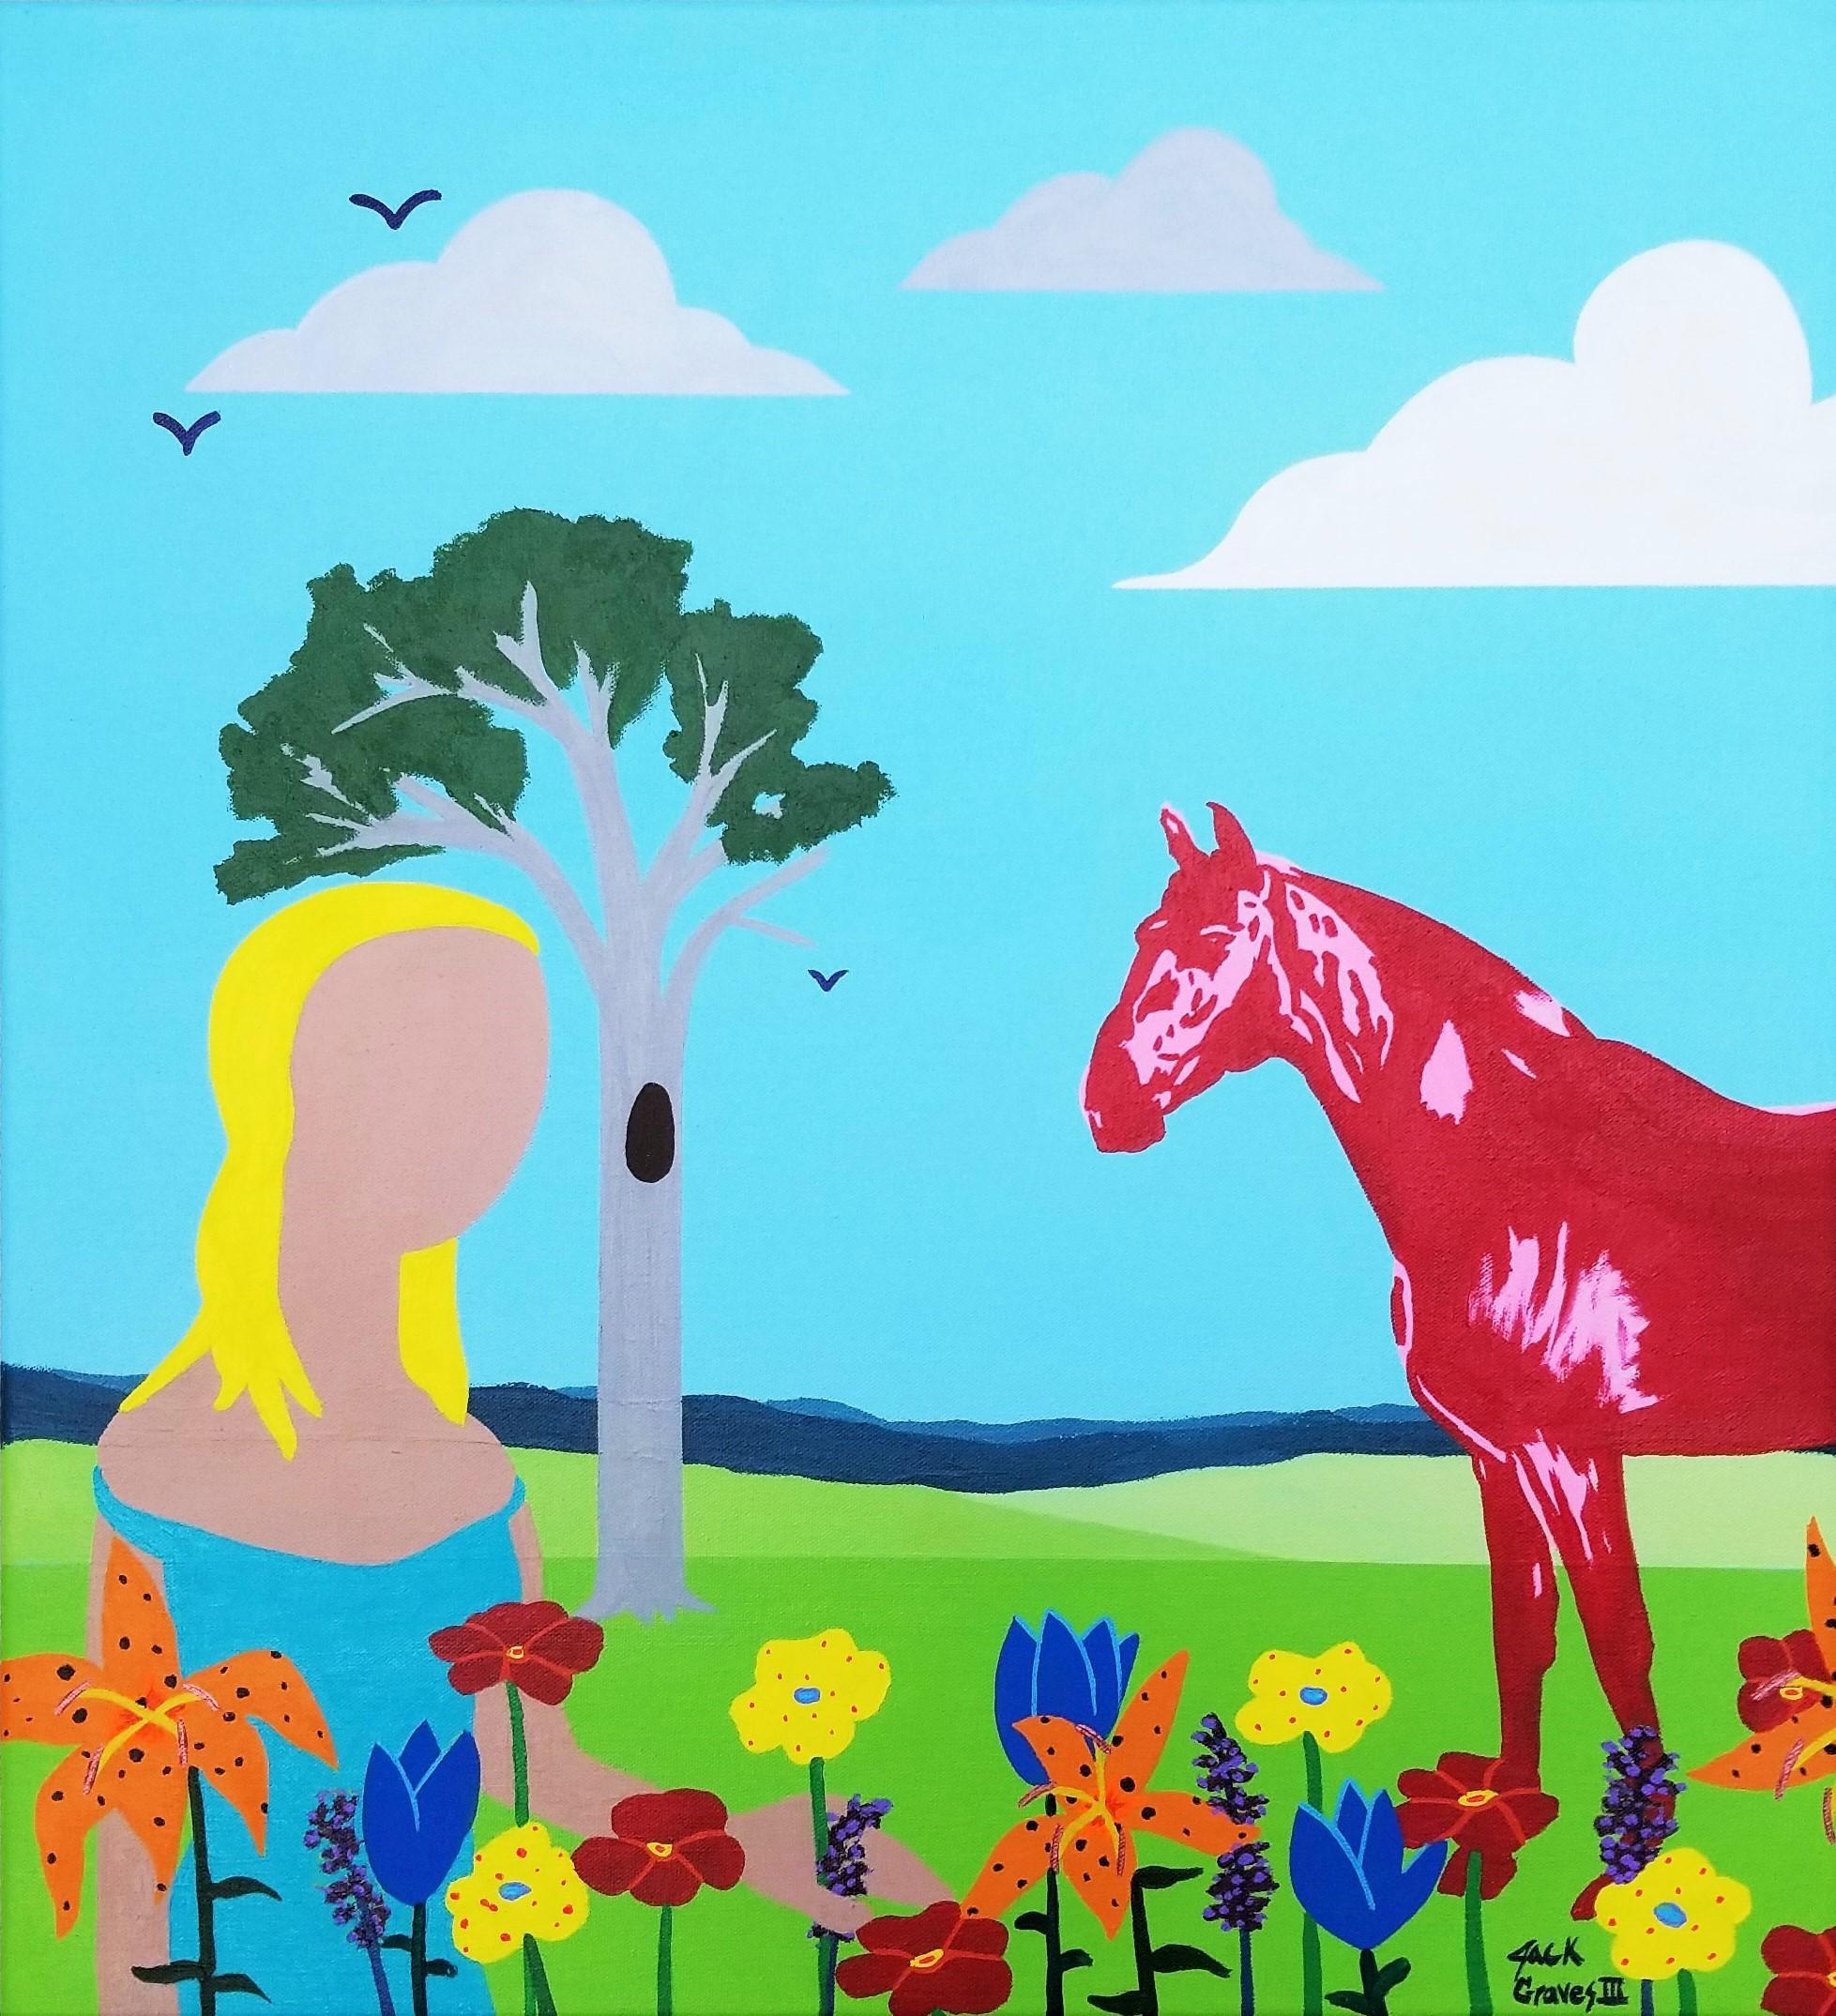 Jack Graves III Animal Painting - Horse in Pasture with Flowers /// Contemporary Landscape Lady Girl Painting Art